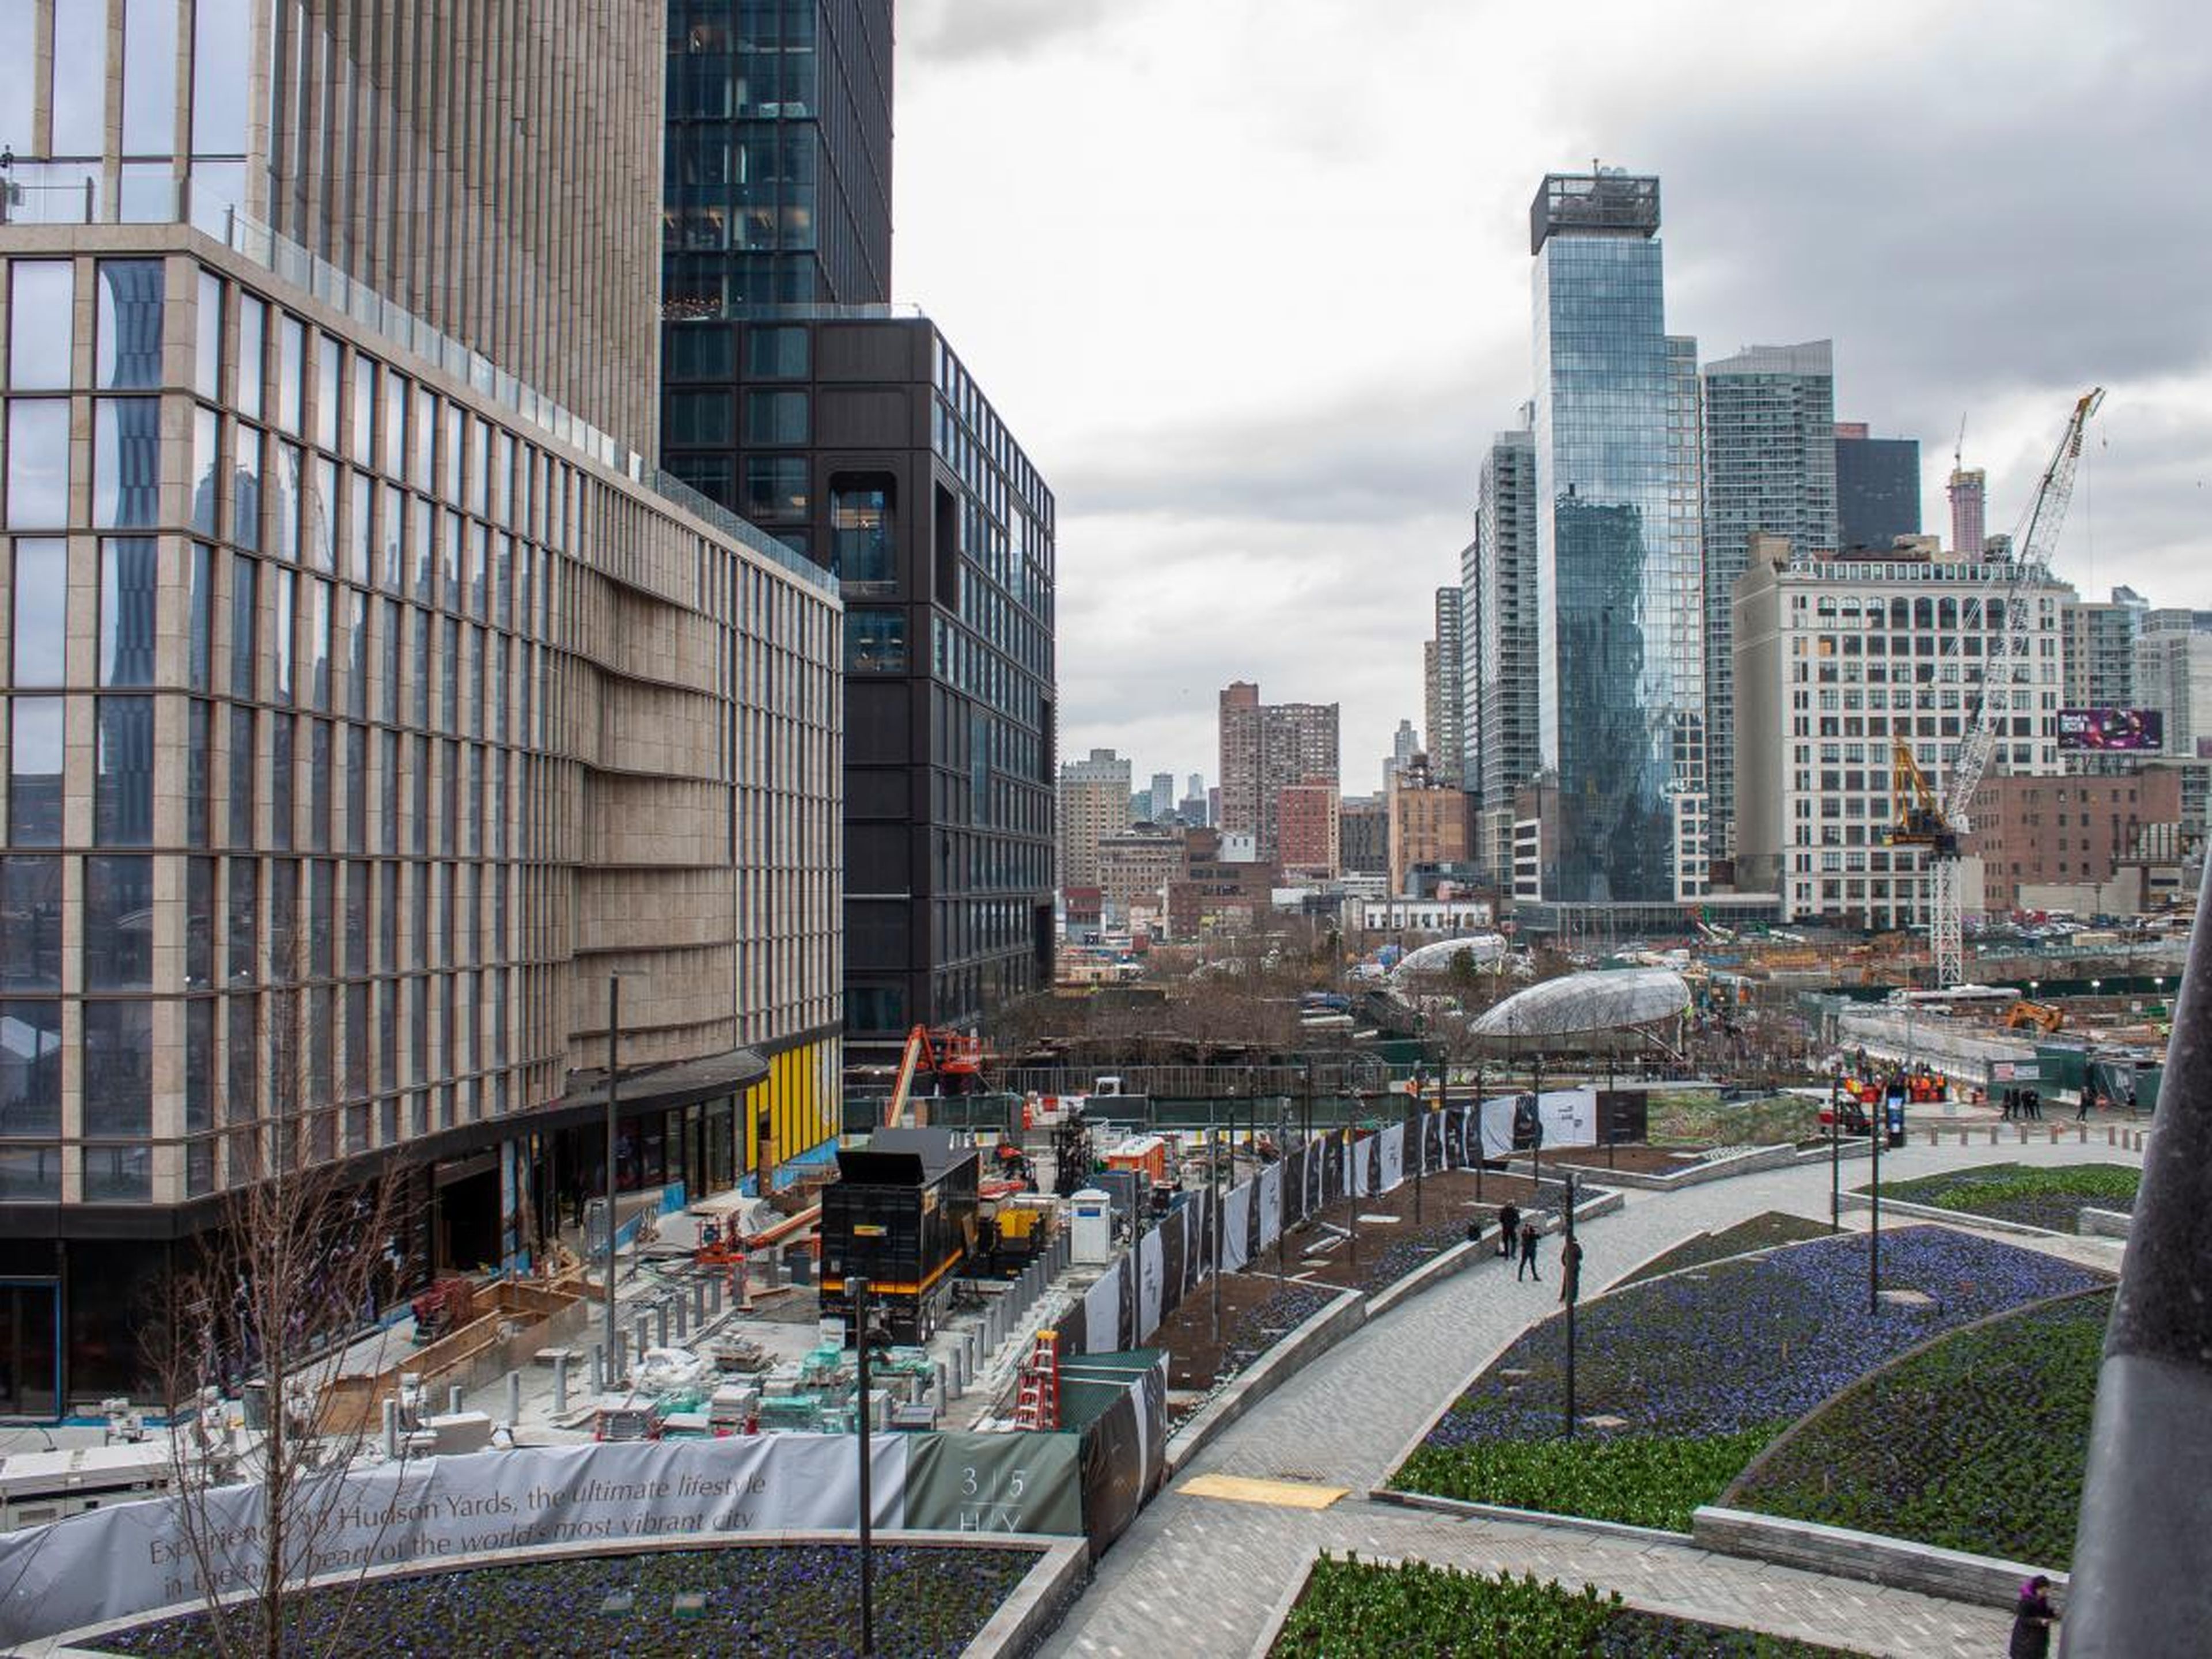 Looking north, you can see that some parts of Hudson Yards are still construction zones.